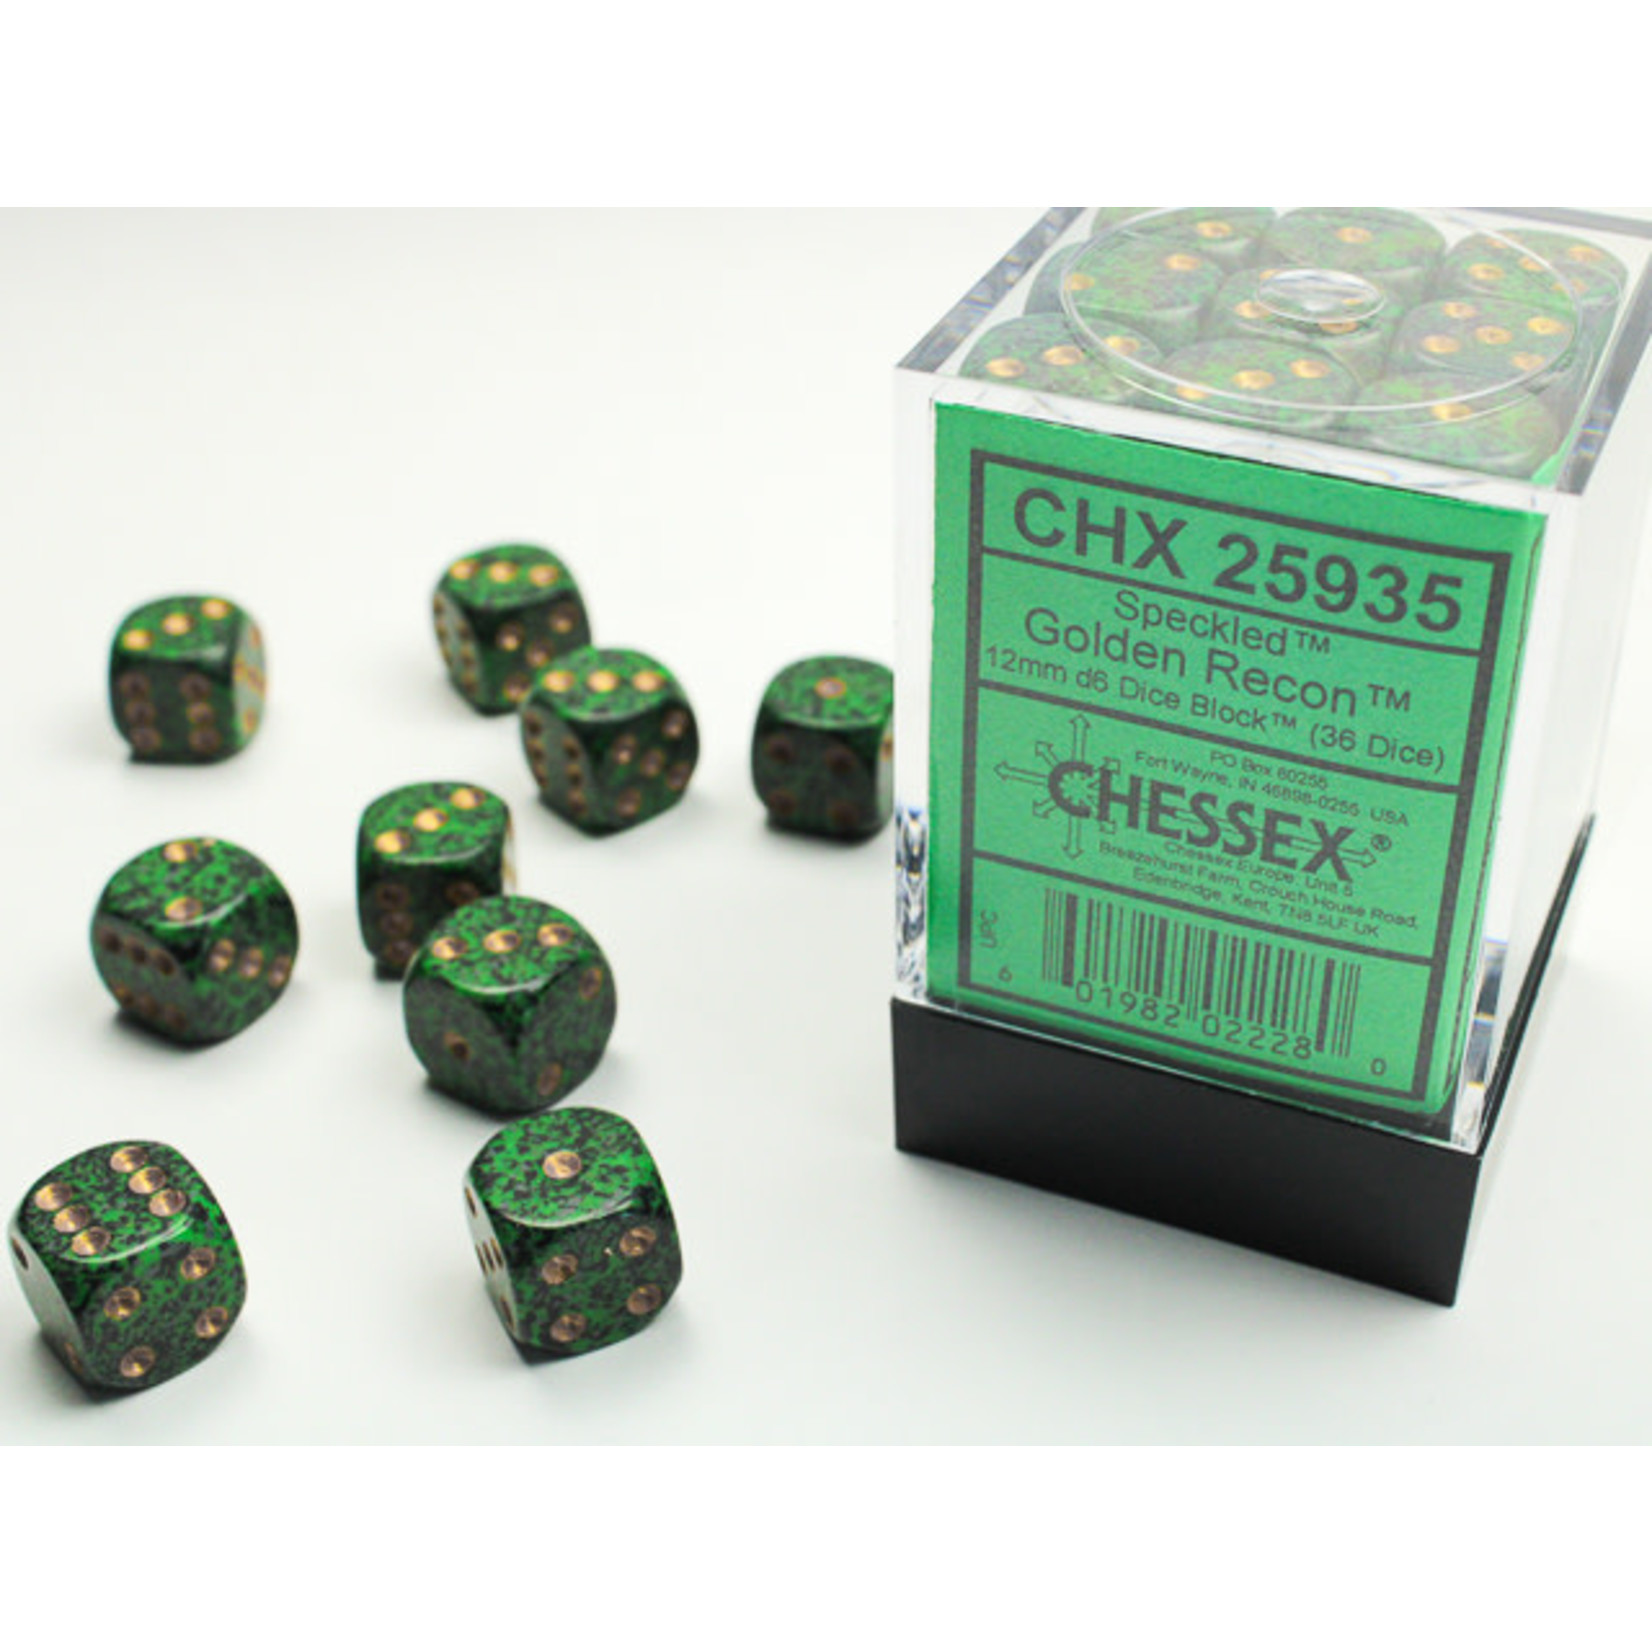 Chessex 25935 Speckled 36pc Golden Recon Dice